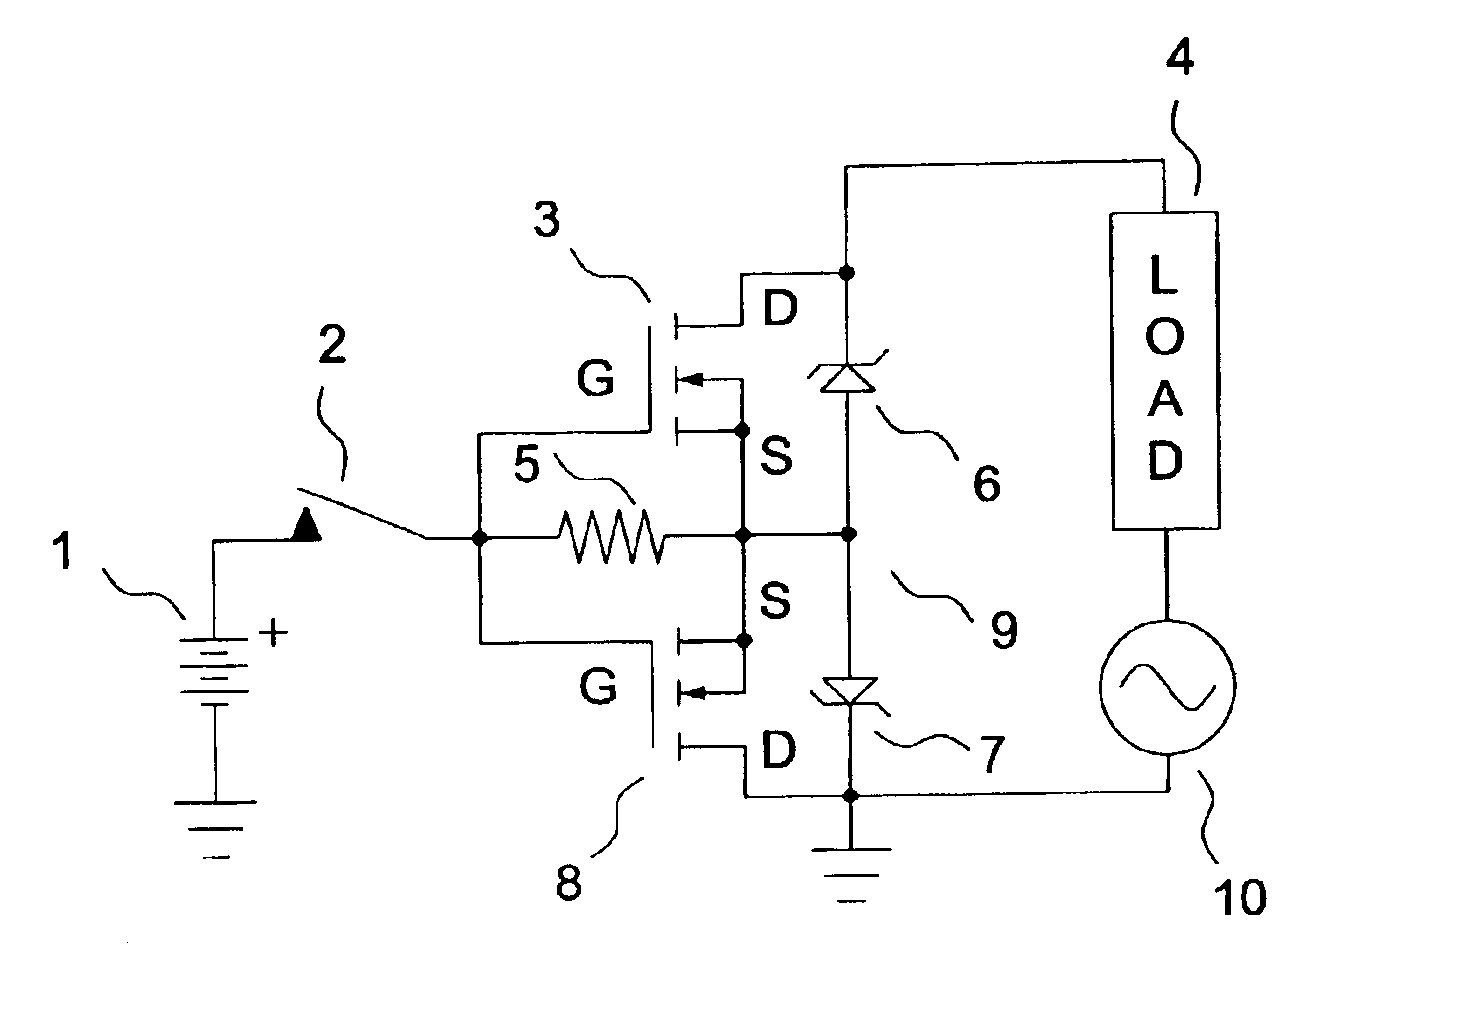 High speed bi-directional solid state switch